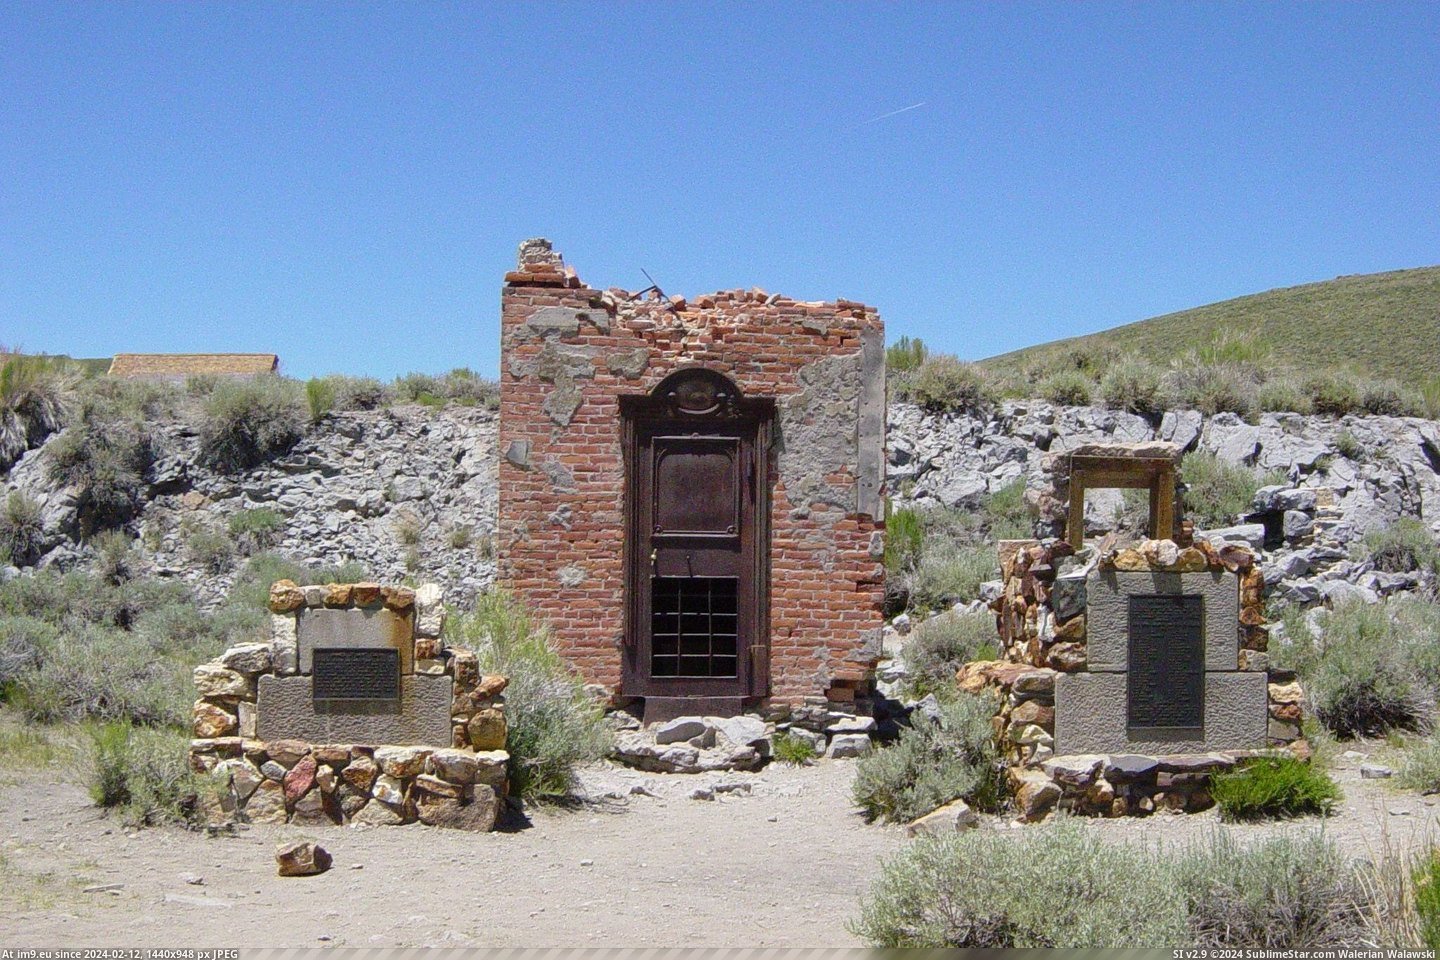 #California #Bodie #Bank #Ruins Bodie Bank Ruins In Bodie, California Pic. (Image of album Bodie - a ghost town in Eastern California))